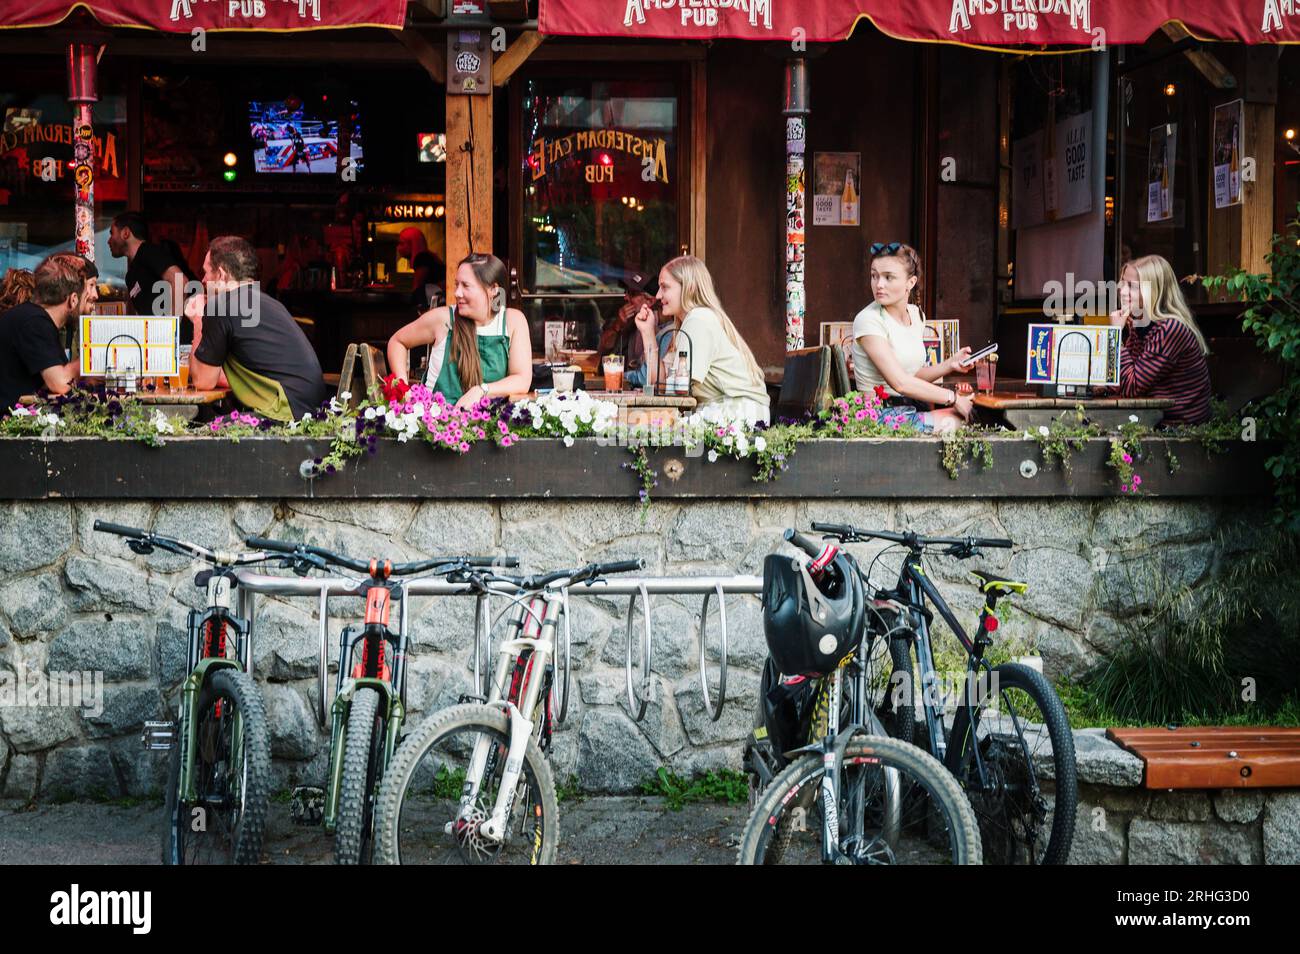 Tourists dine outside on a summer evening on restaurant patios with mountain bikes in the Whistler Village.  Whistler BC, Canada. Stock Photo